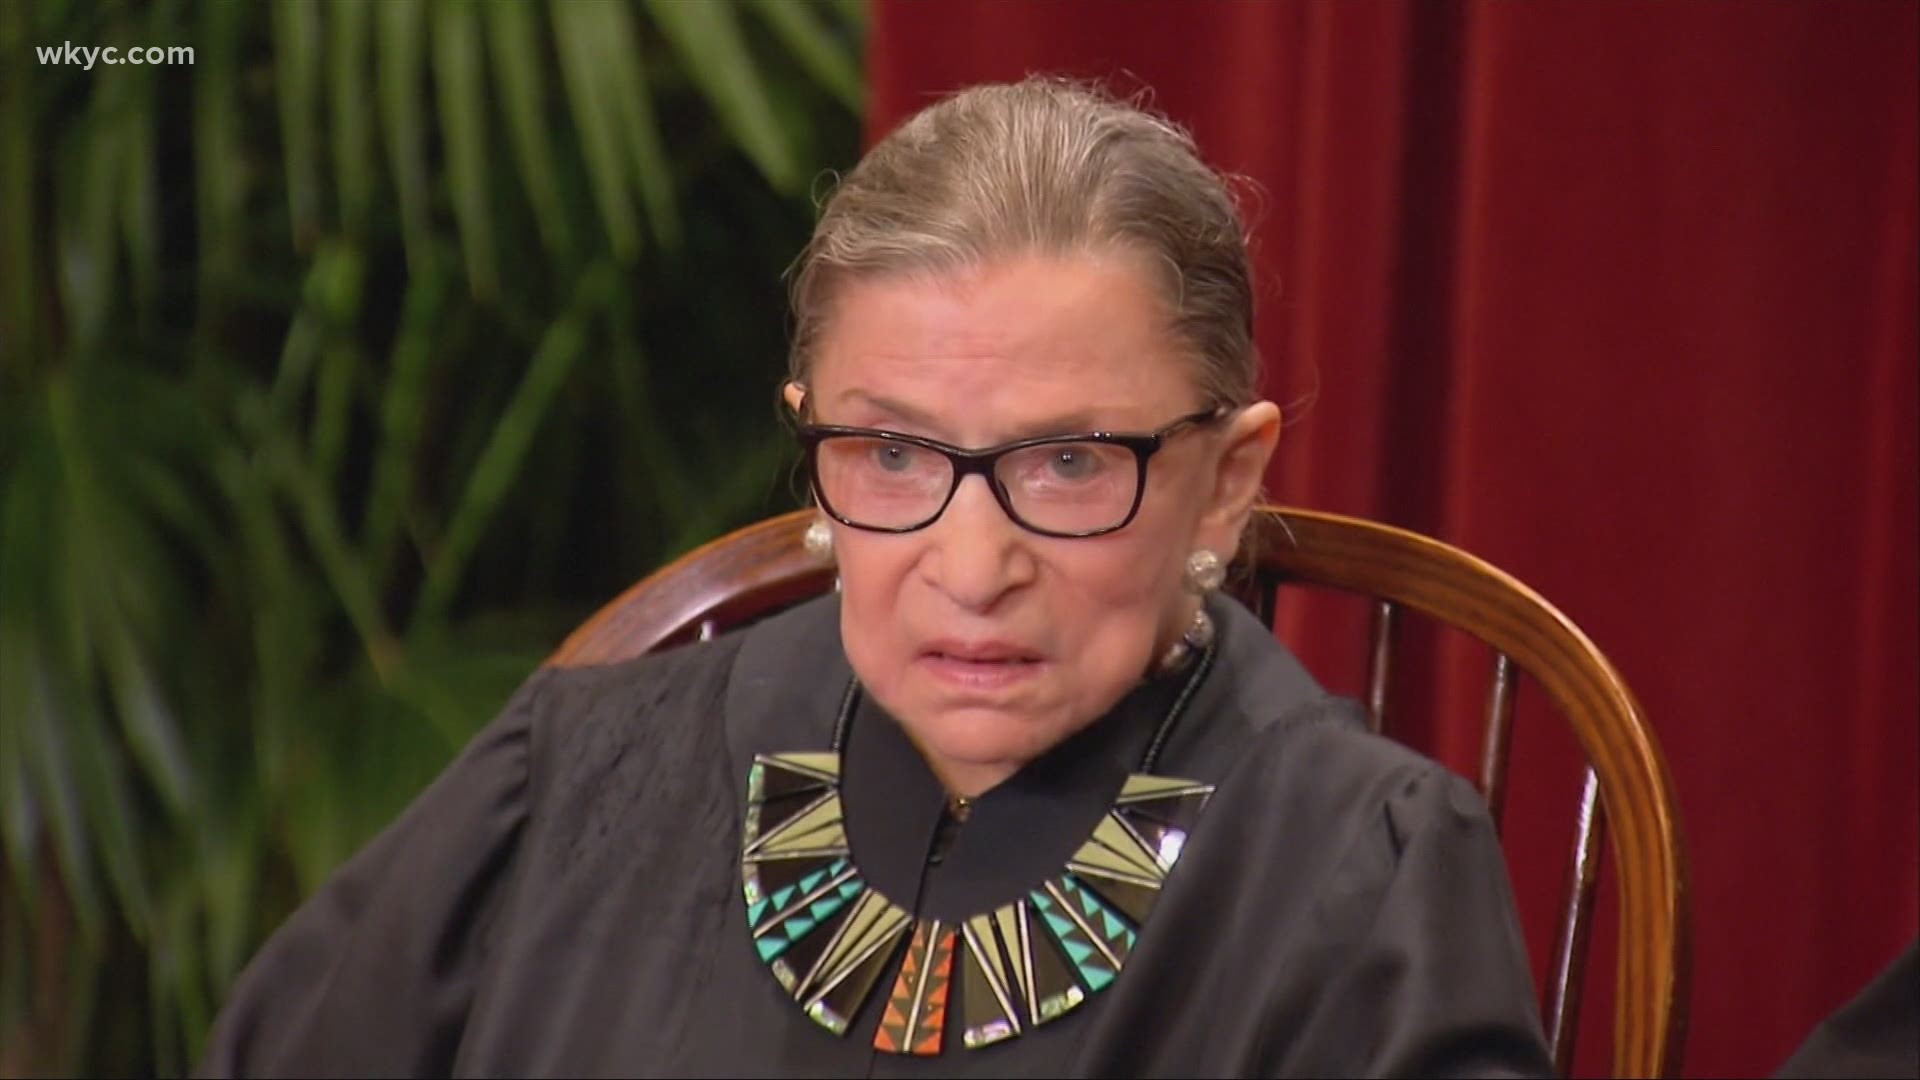 Supreme Court Justice Ruth Bader Ginsburg was an icon, paving the way for many people across Northeast Ohio. Andrew Horansky reports.